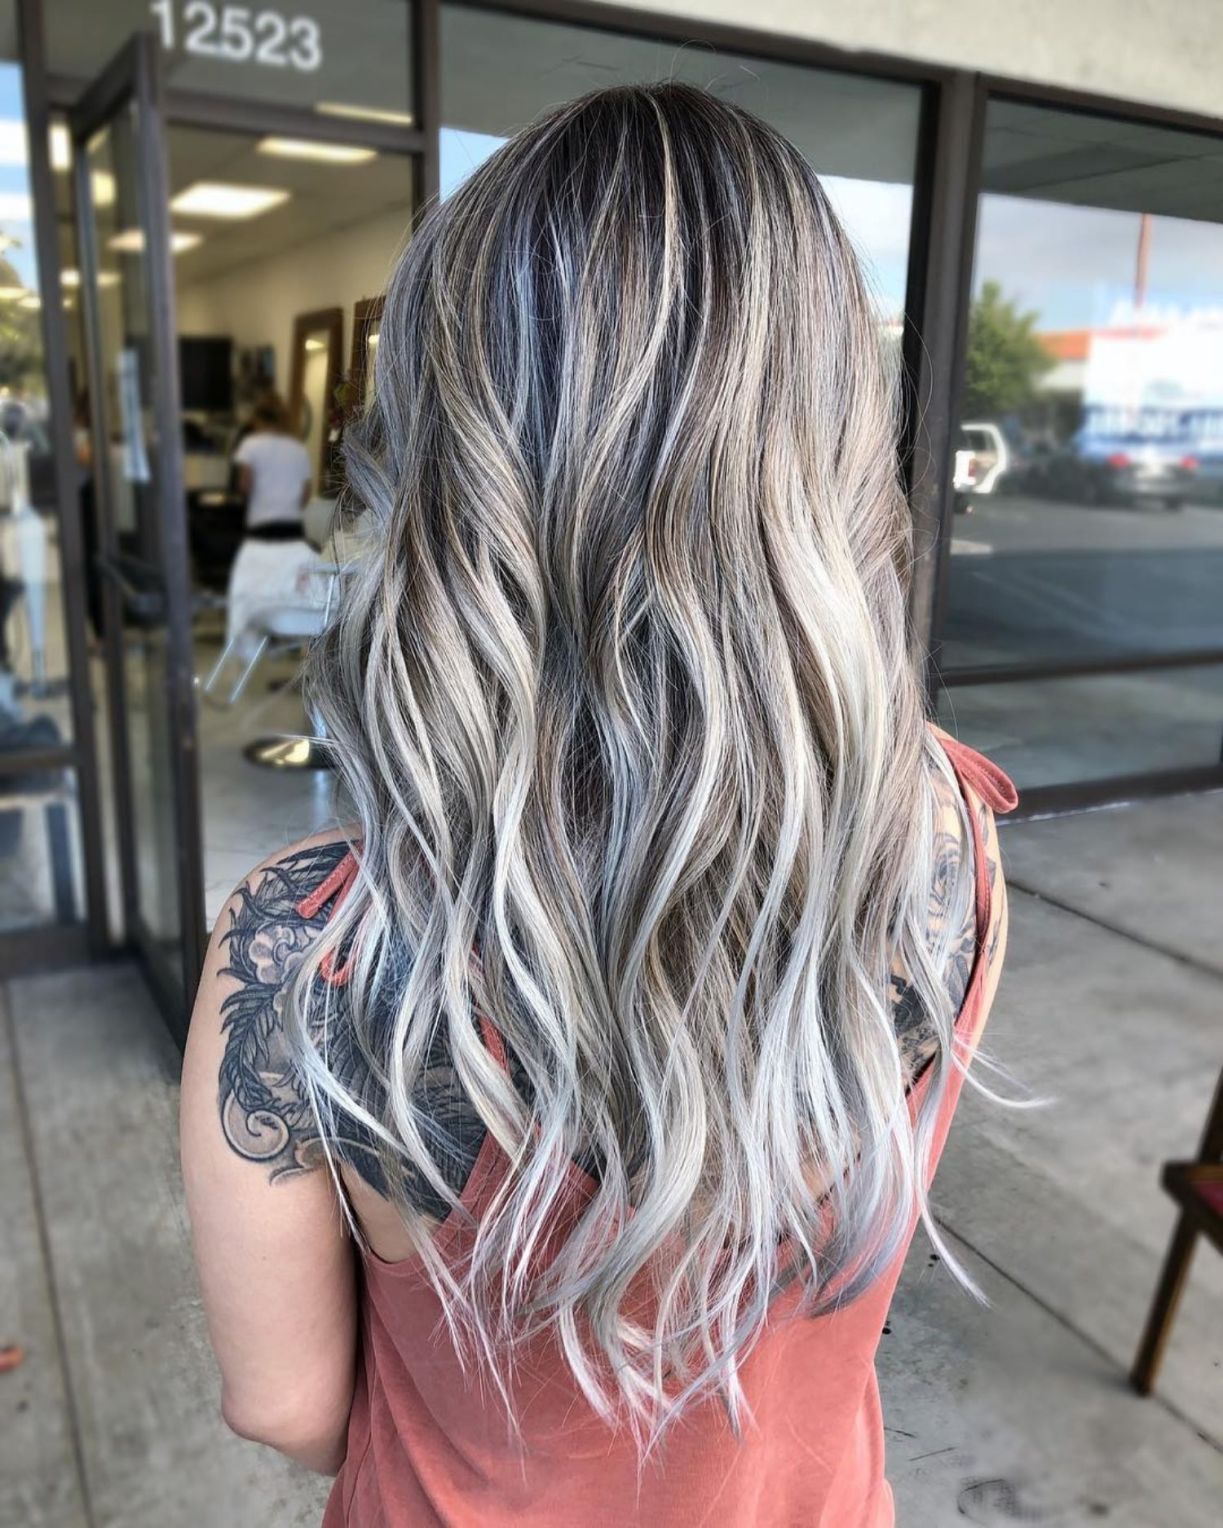 60 Shades of Grey: Silver and White Highlights for Eternal Youth -   6 hair Gray brunette ideas